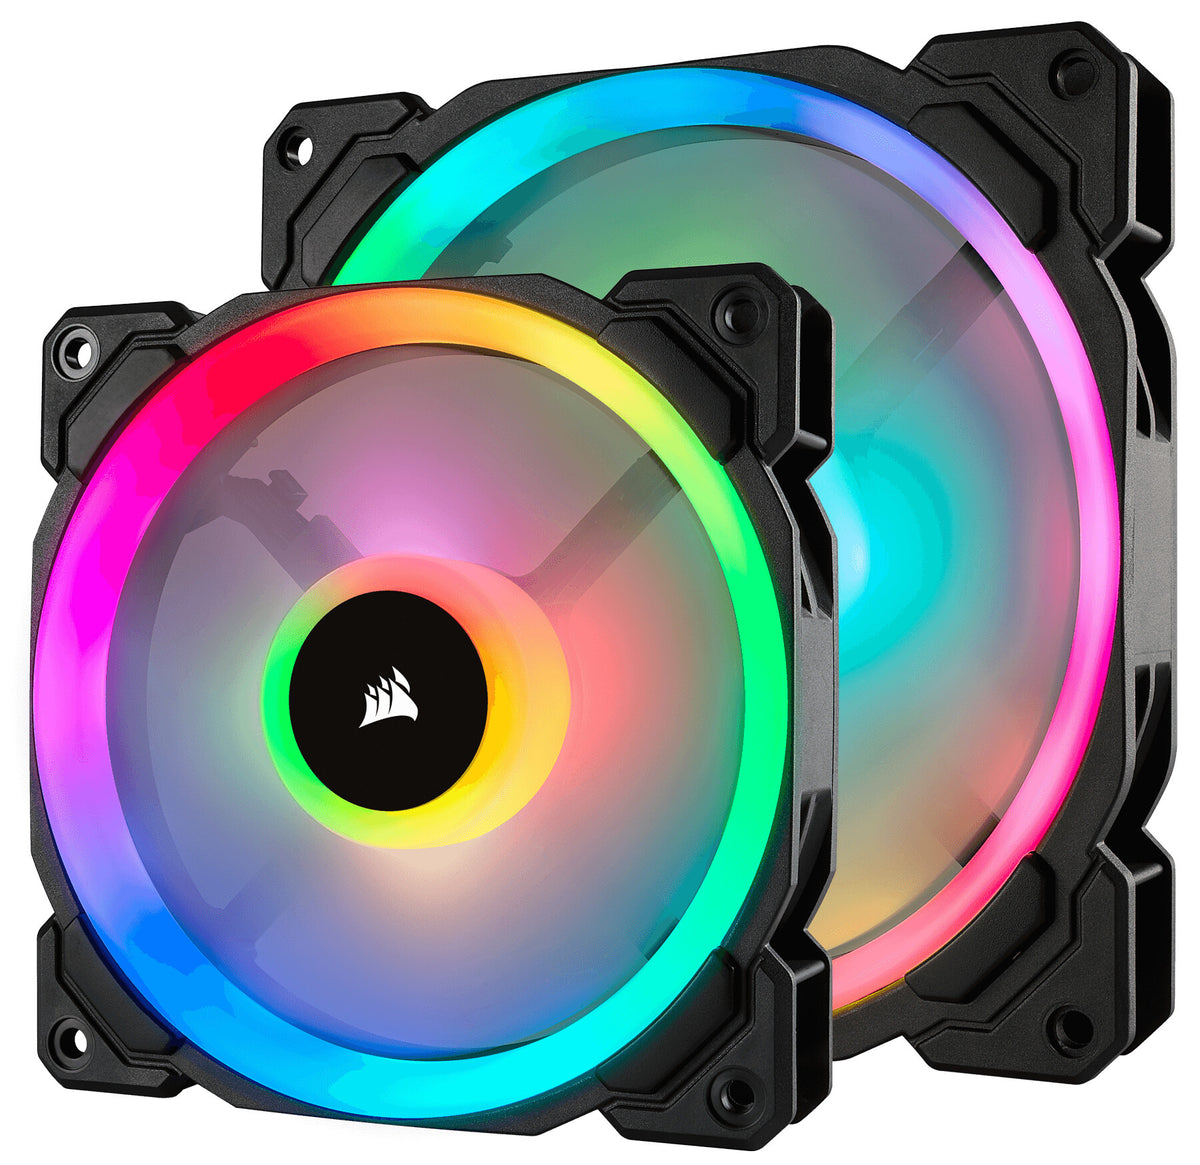 Corsair LL120 RGB - Computer Case Fan in Black / White - 120mm (Pack of 3)